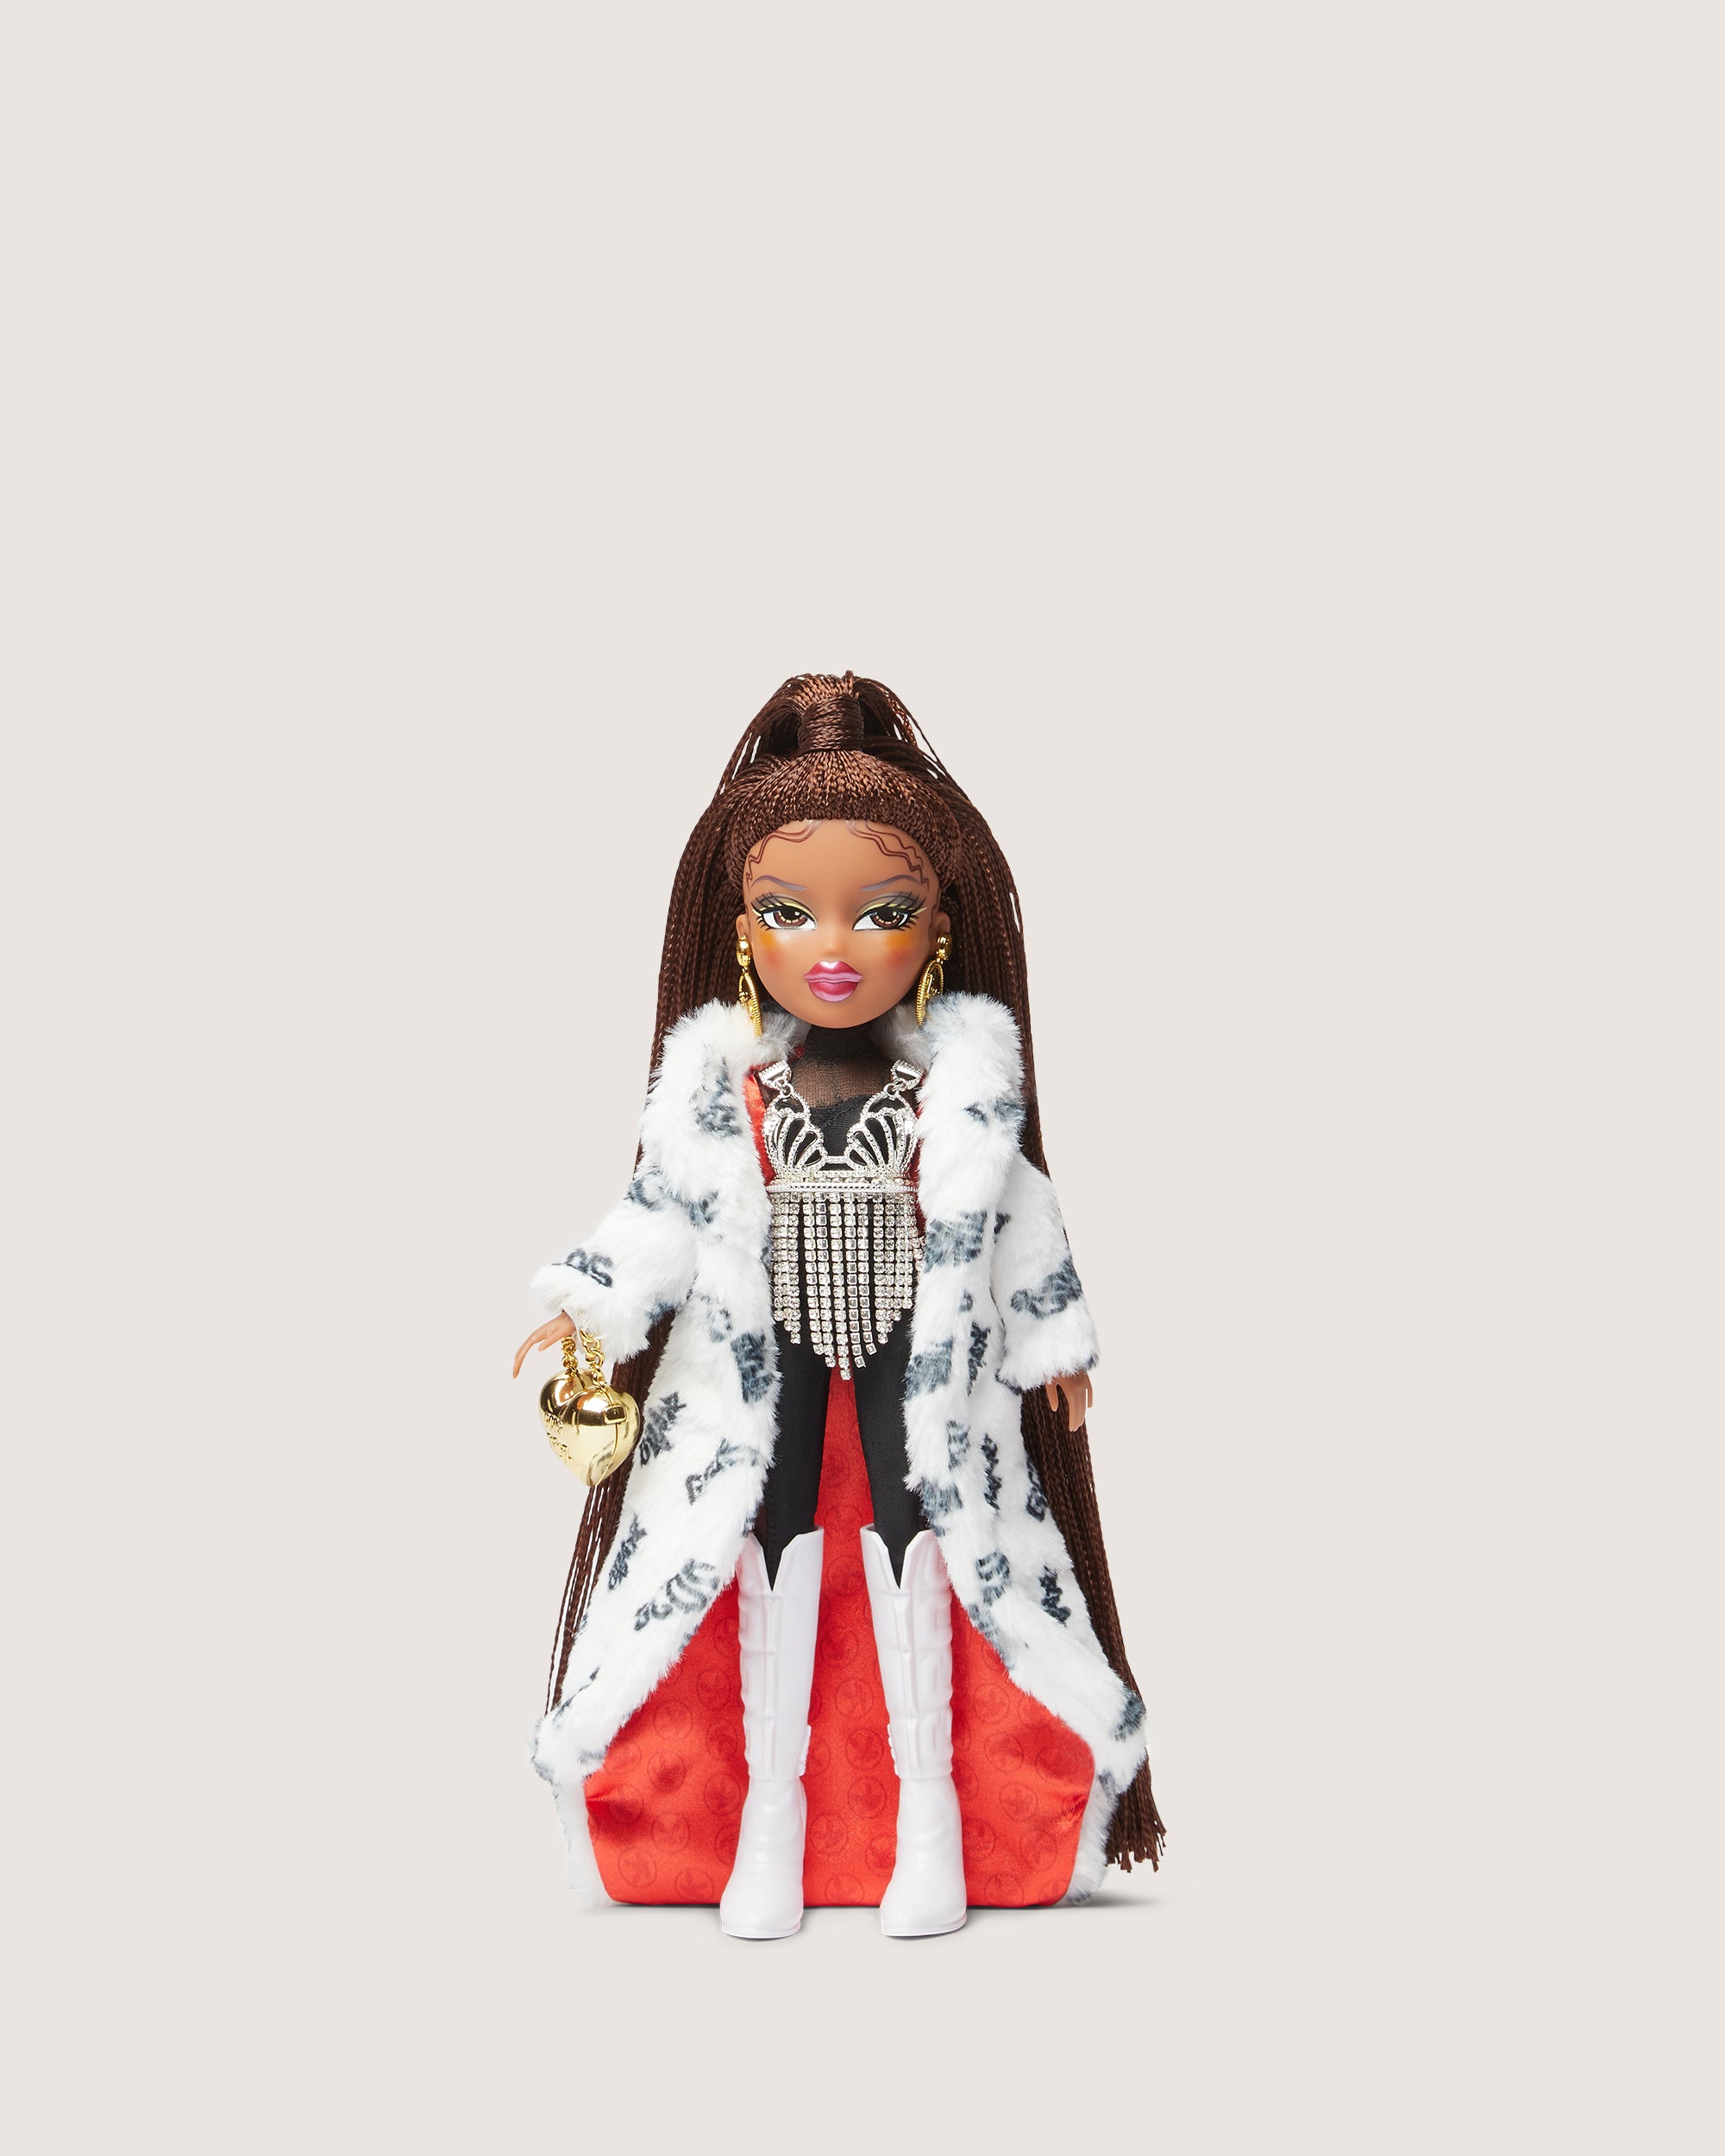 bratz doll sasha  Bratz 573494EUC x GCDS Special Edition Designer Fashion  Doll-Sasha-Includes Outfit, Accessories, Hairbrush, & More-Fully  Articulated-Premium Packaging, Collectable-for Collectors & Kids Ages 7+